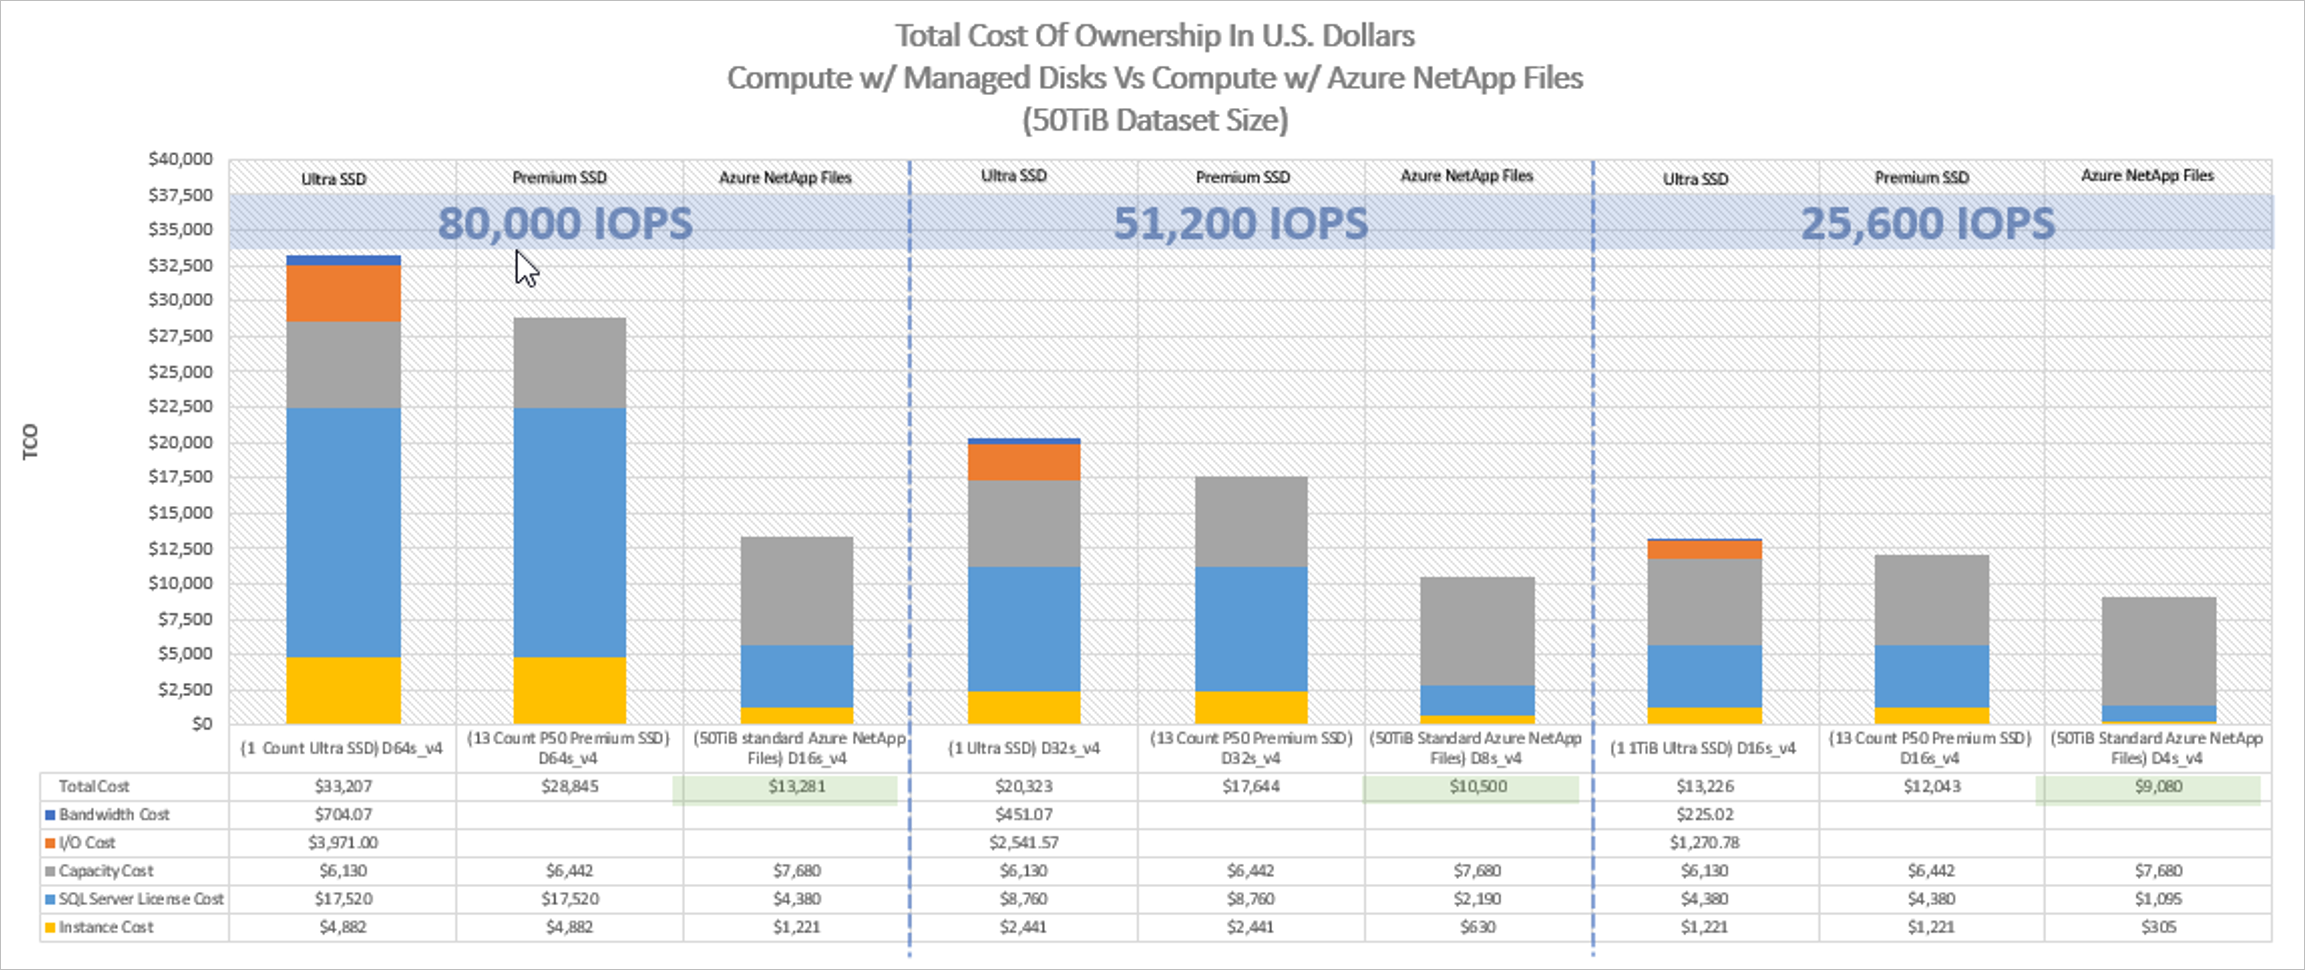 Graphic that shows overall cost using a 50-TiB database size.